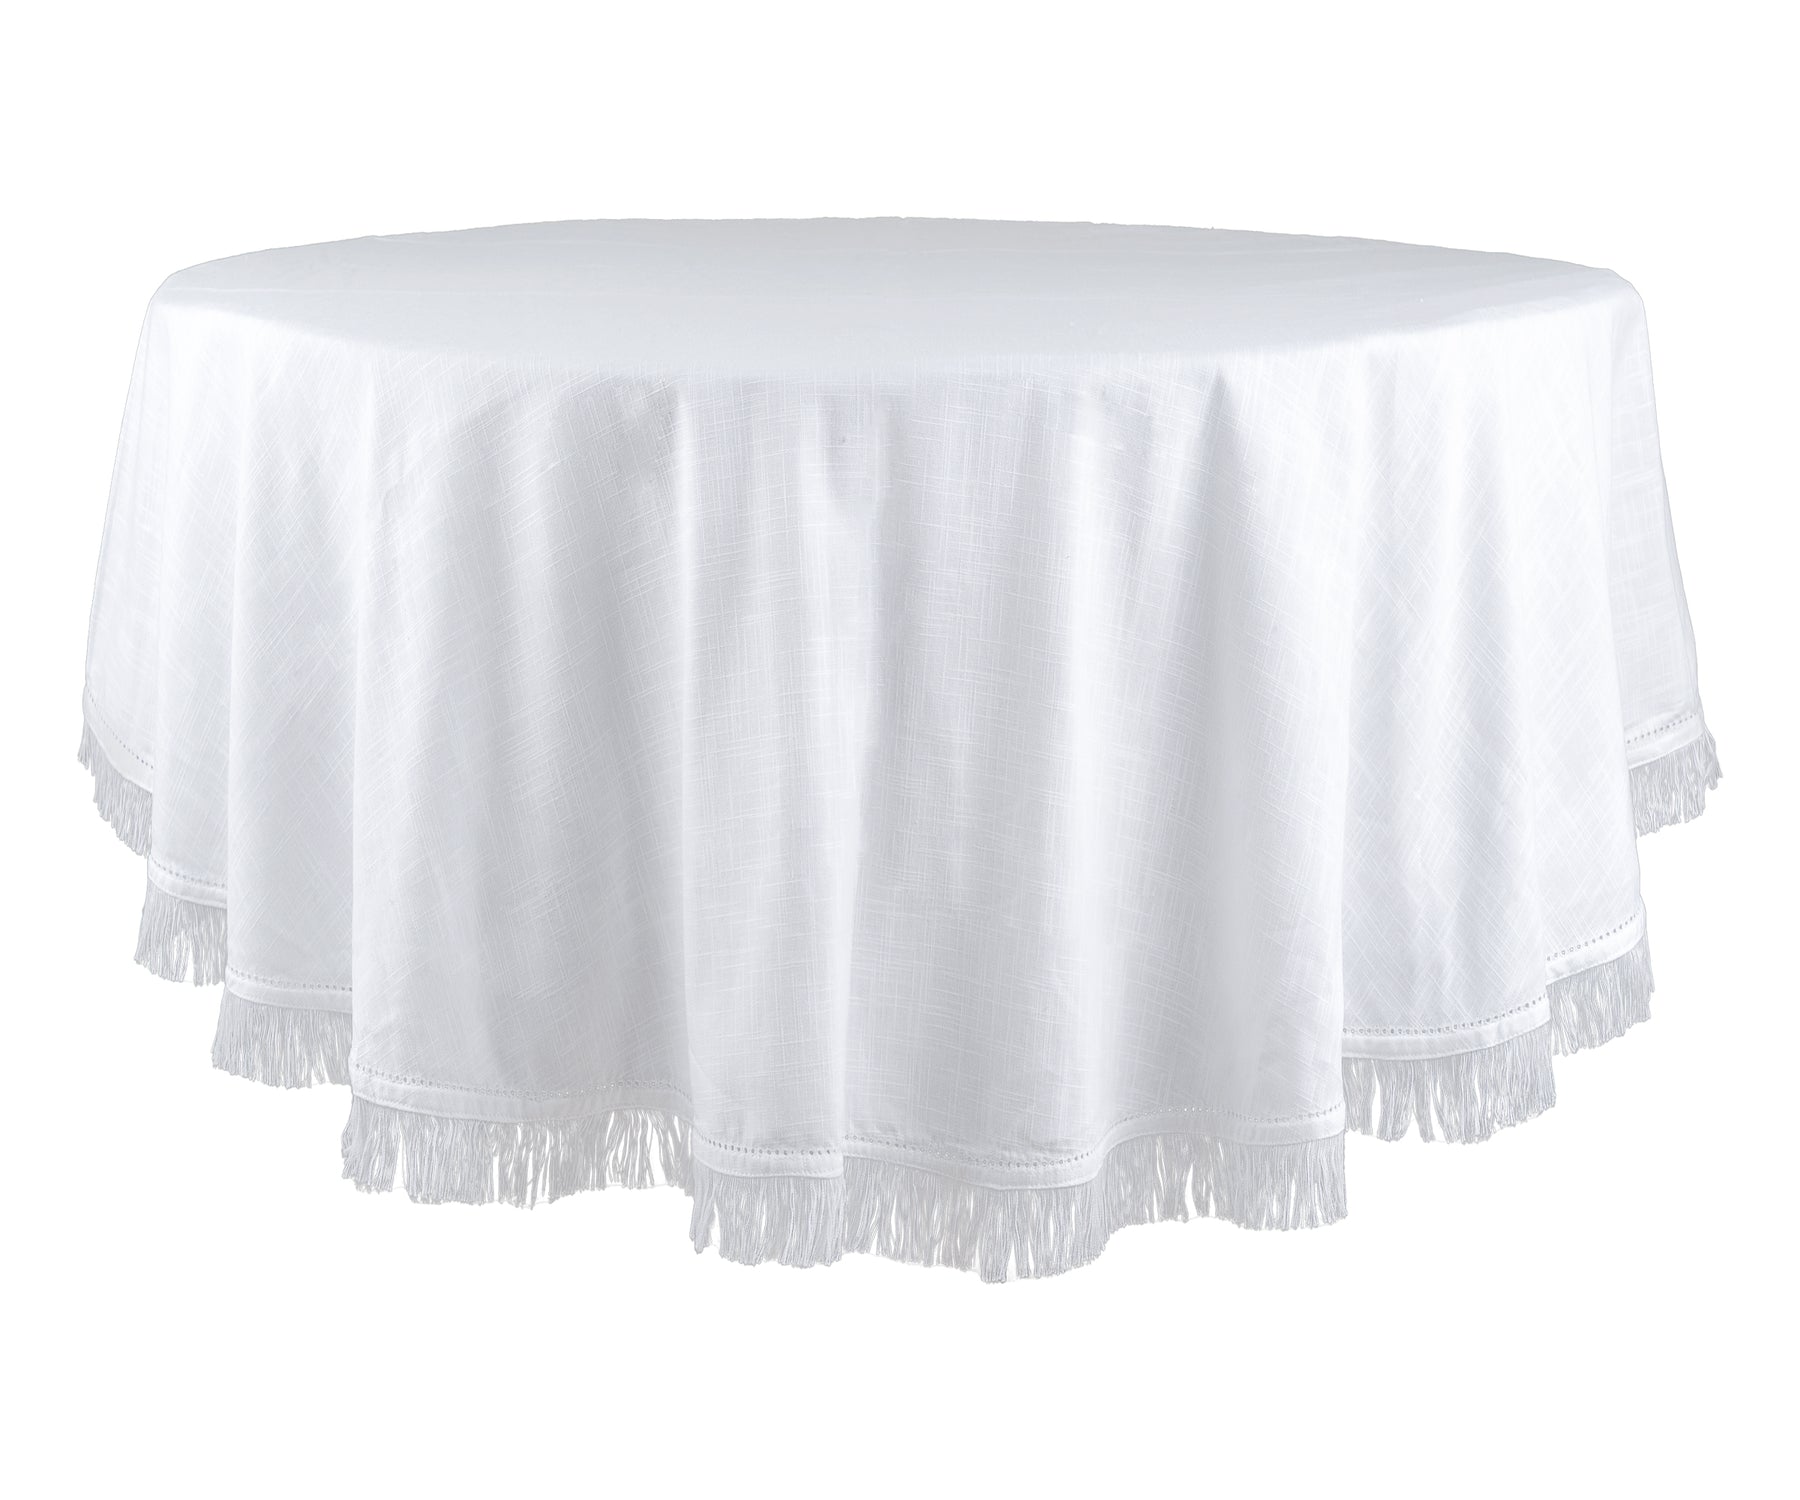 The charm of a white tablecloth lies in its pristine simplicity. It evokes a sense of purity and sophistication, making it a timeless choice for formal occasions or casual gatherings.Stylish buffalo plaid tablecloth enhancing your dining area's rustic charm